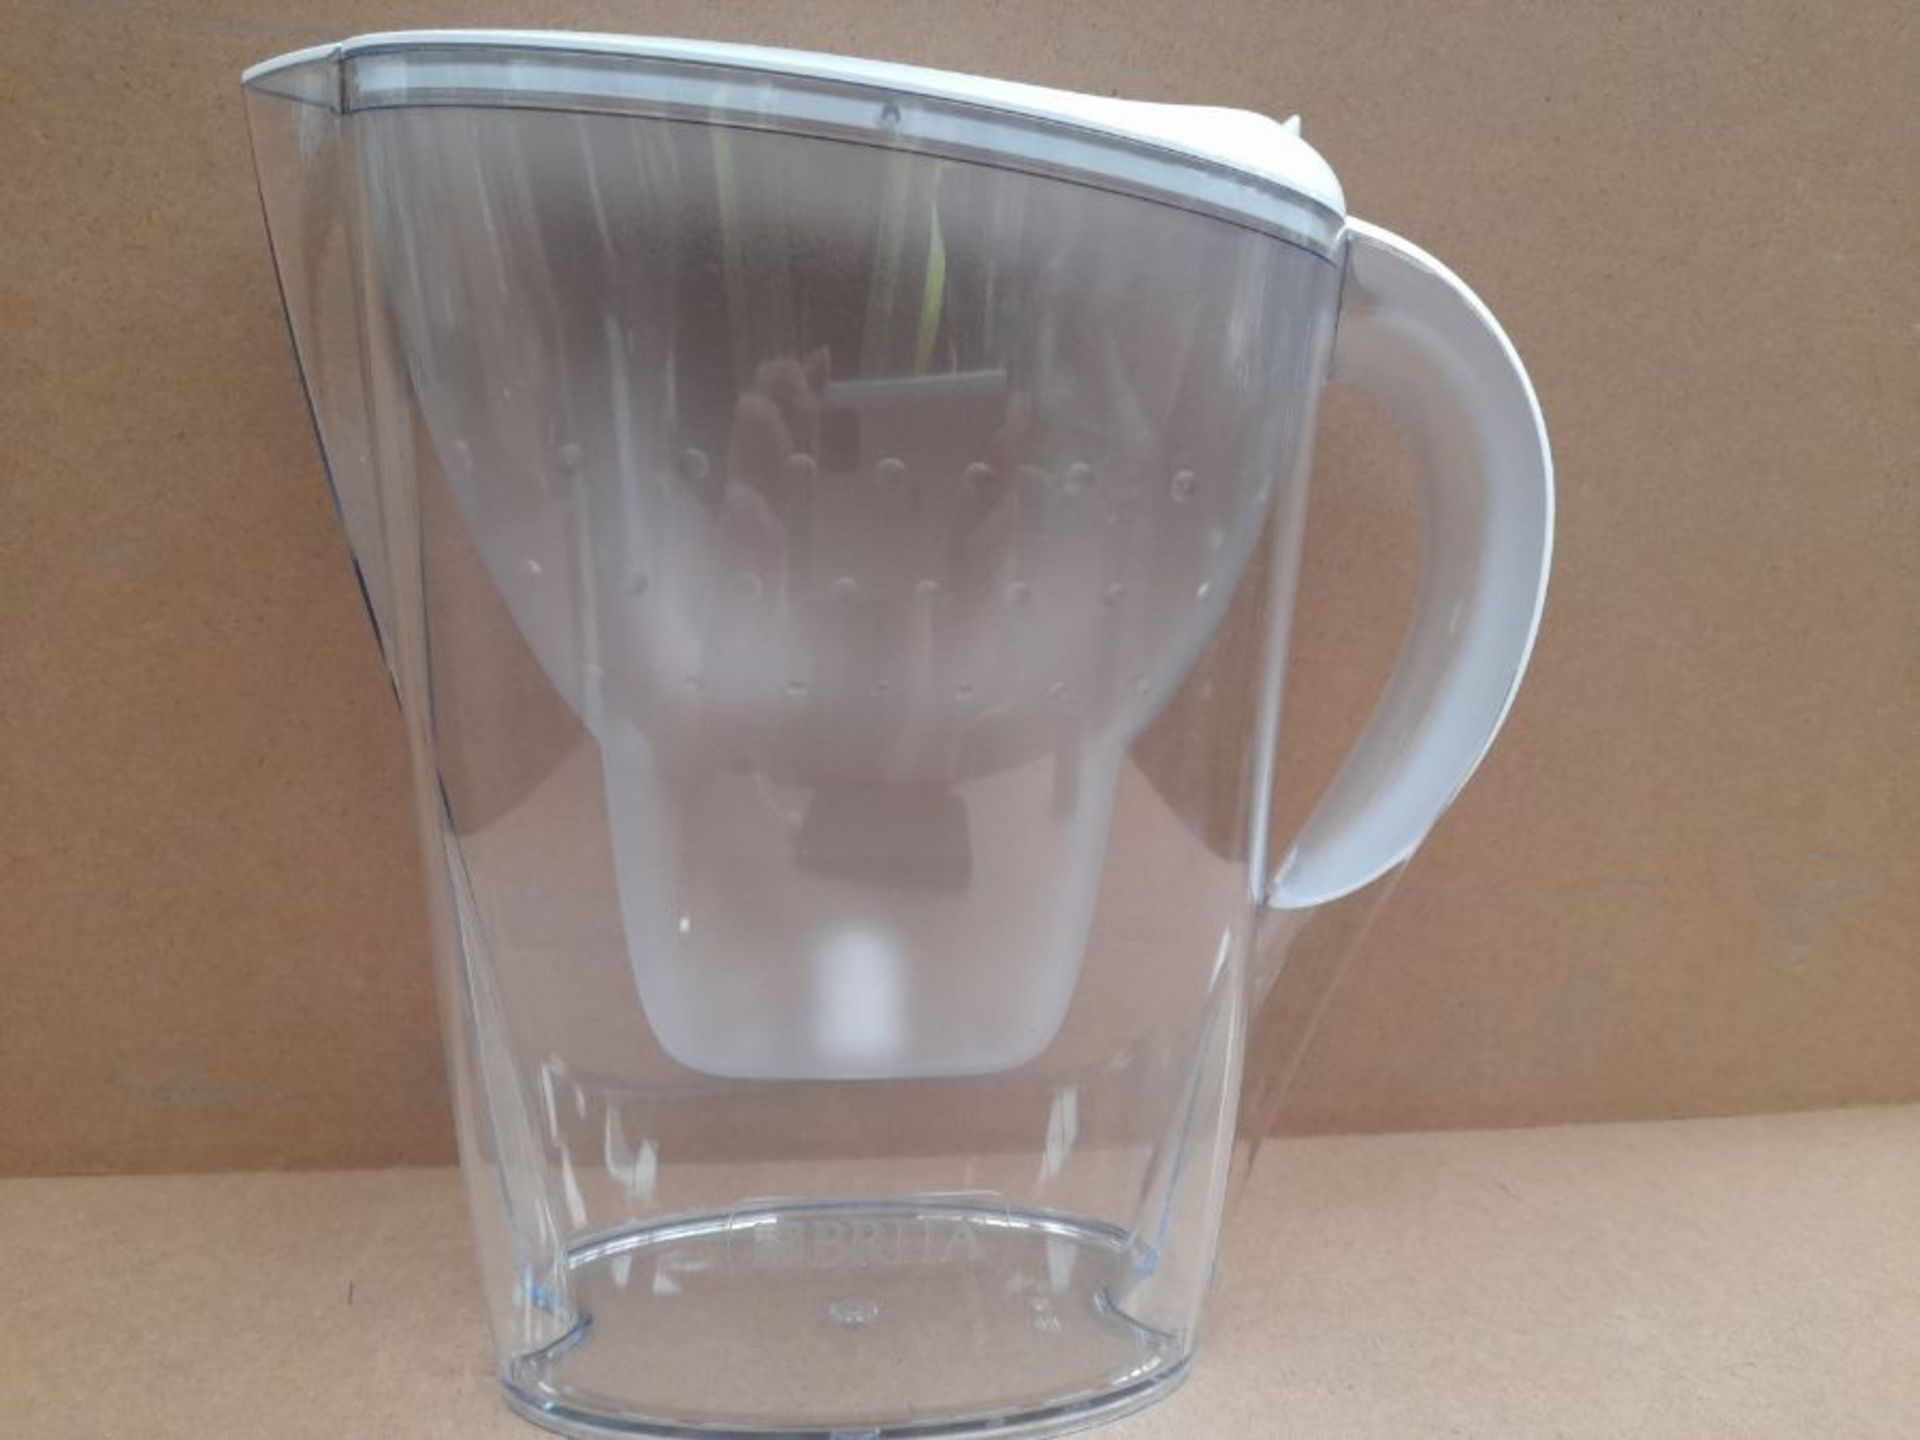 BRITA Marella fridge water filter jug for reduction of chlorine, limescale and impurit - Image 3 of 3